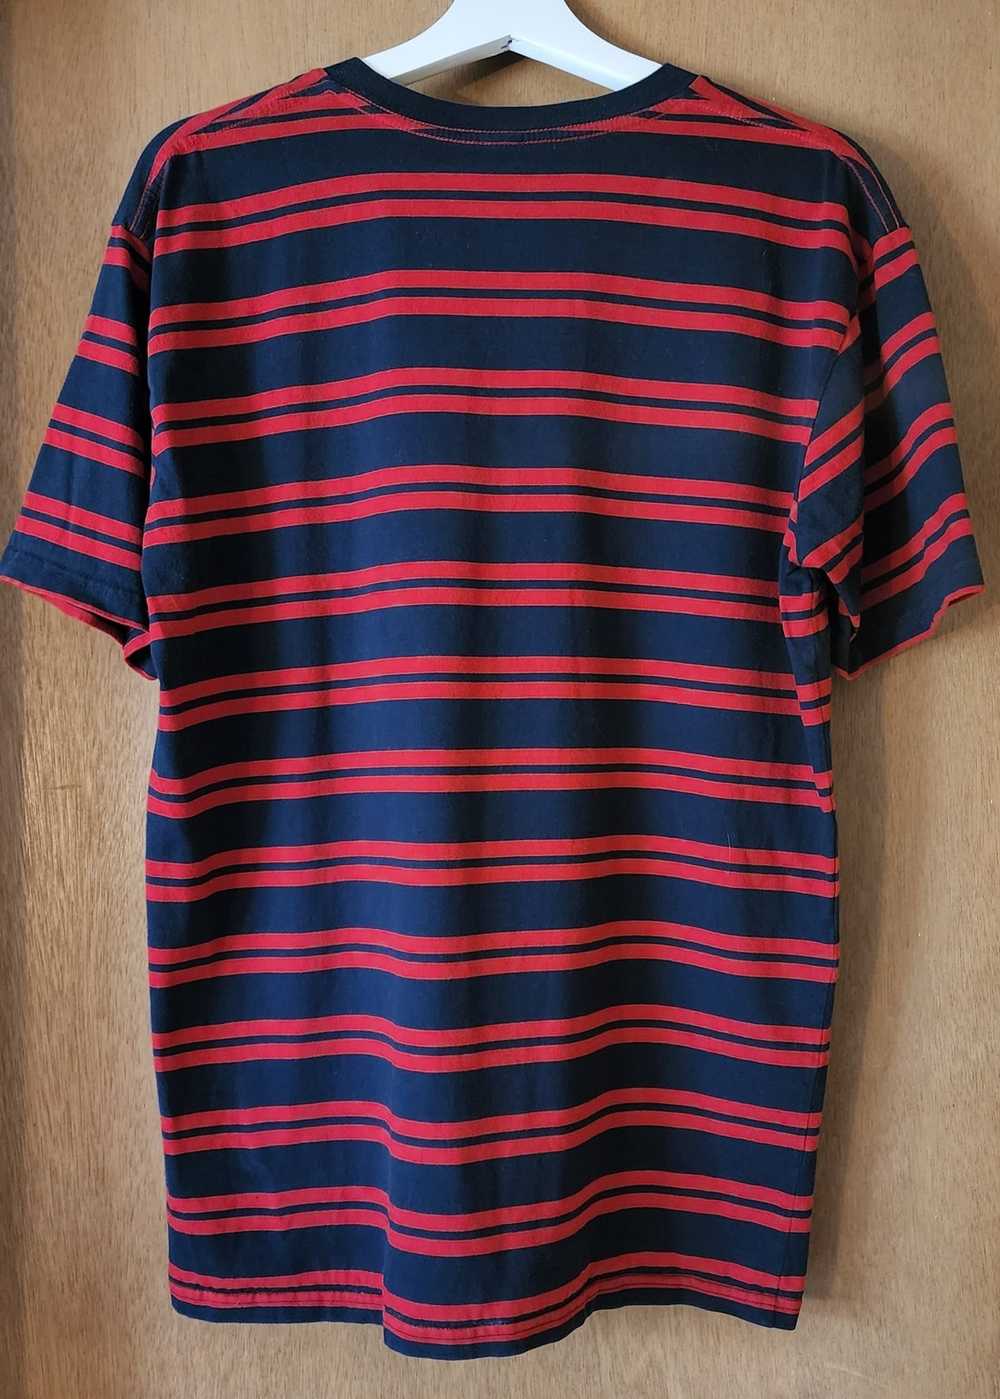 Gnarcotic Gnarcotic Striped T-Shirt - image 2